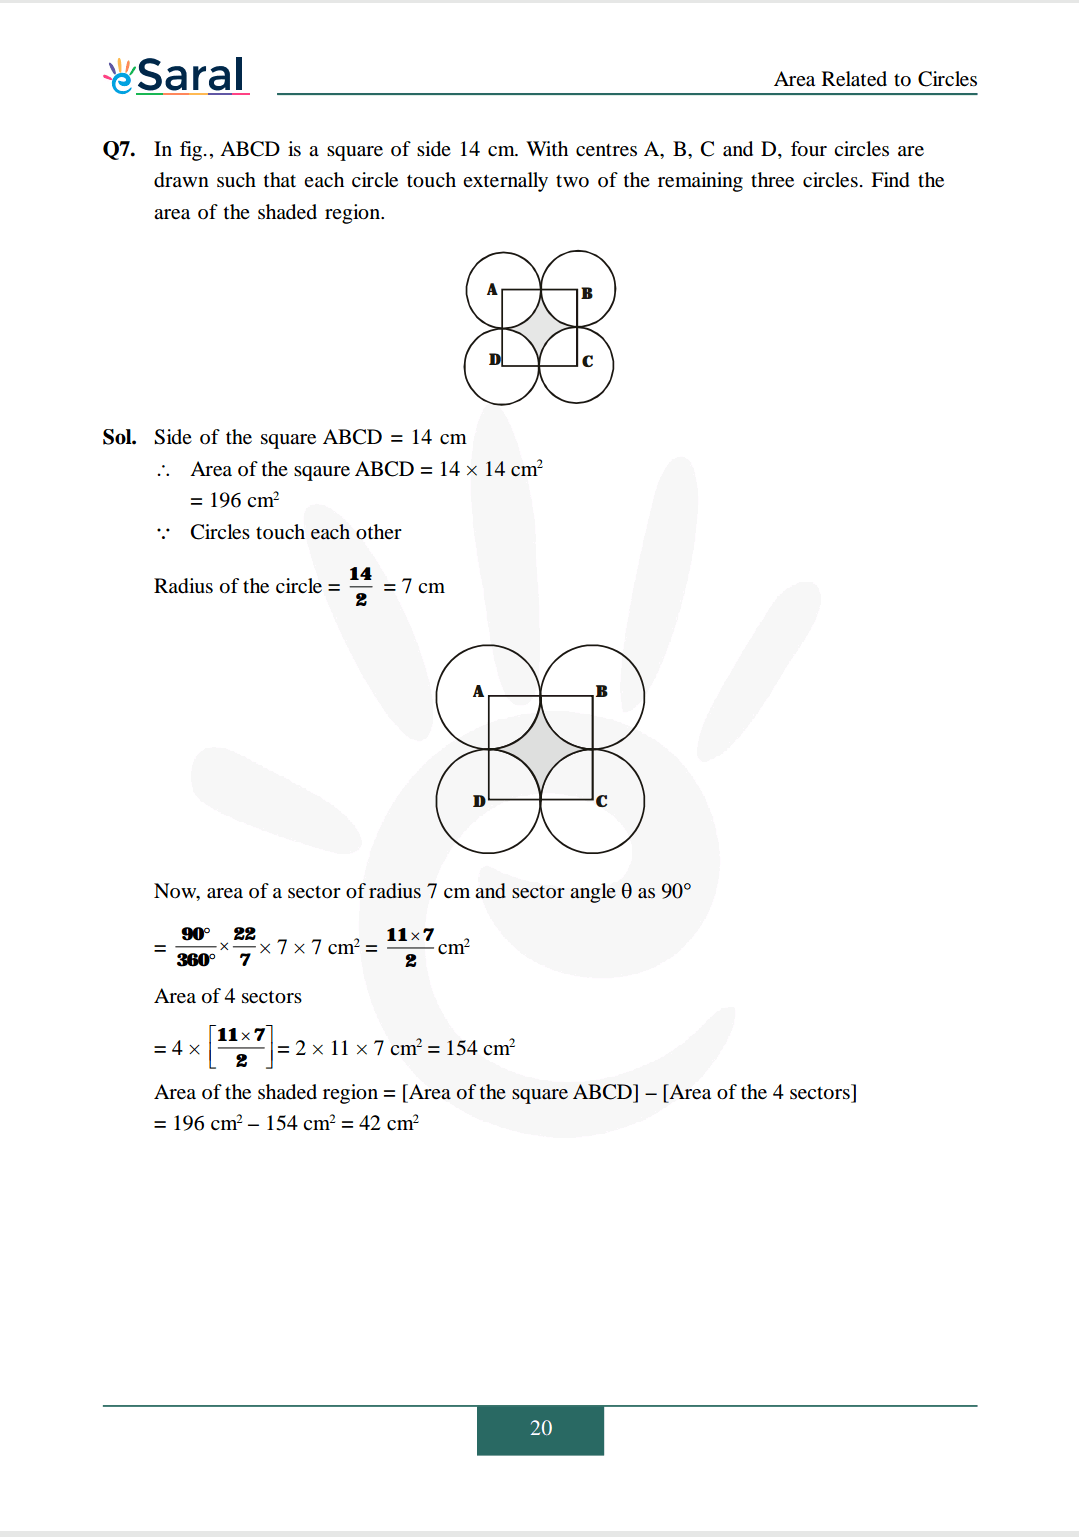 Chapter 12 exercise 12.3 solutions Image 6